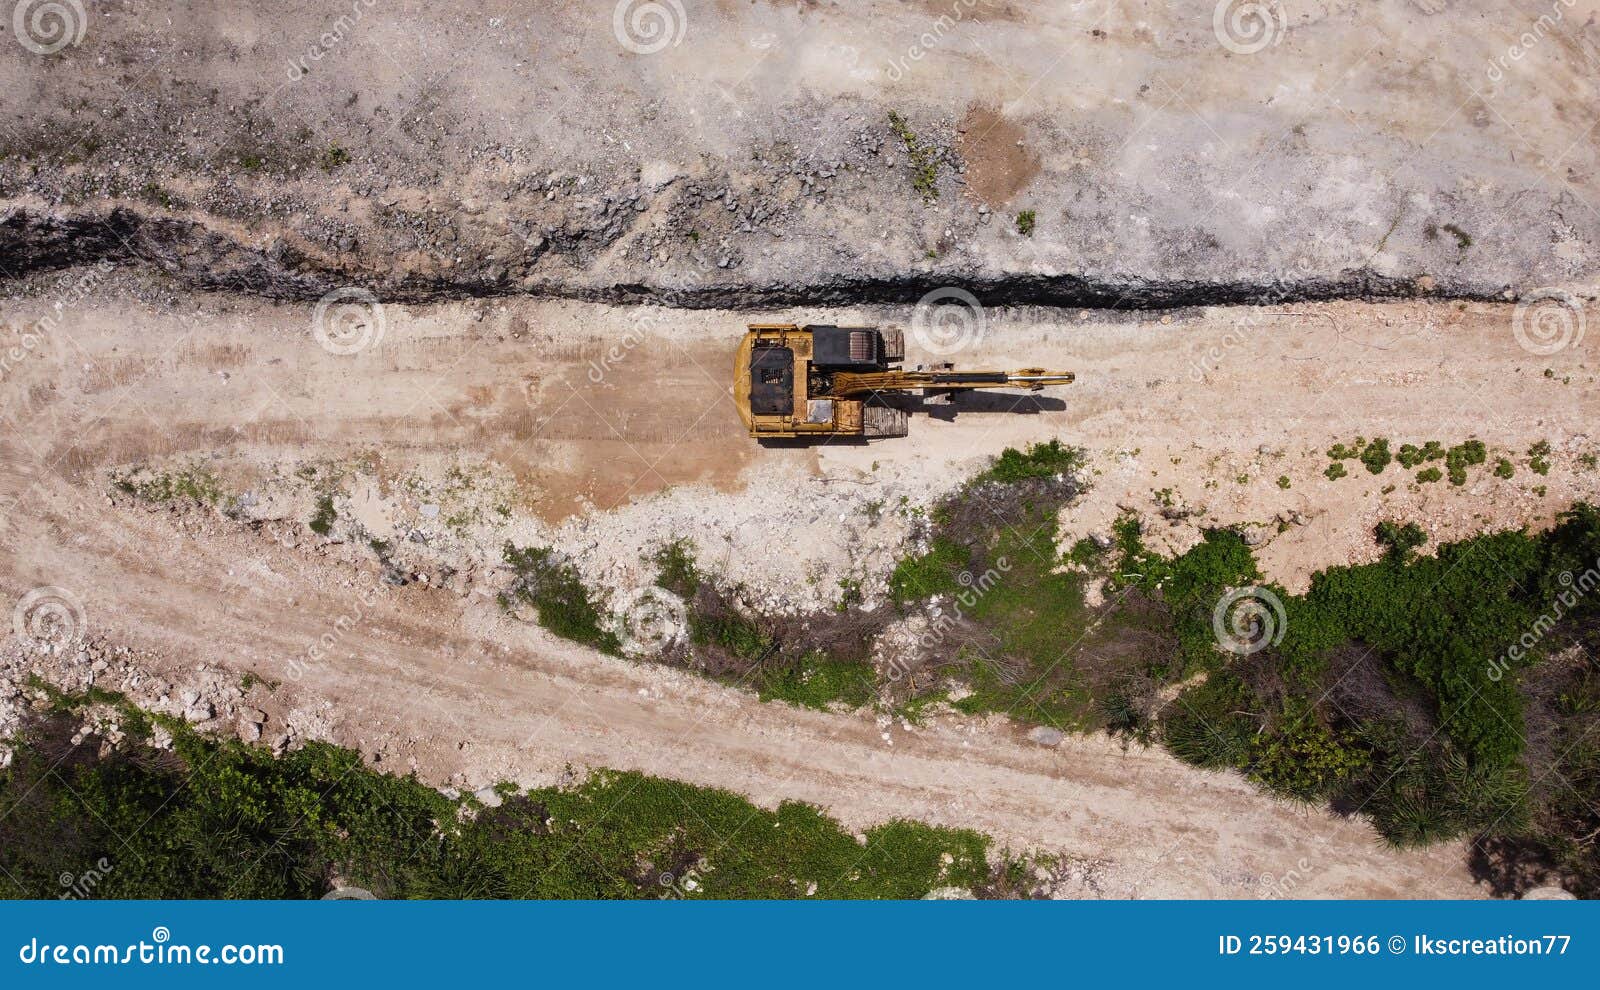 an excavator travelling on unpaved road corner aerial photo